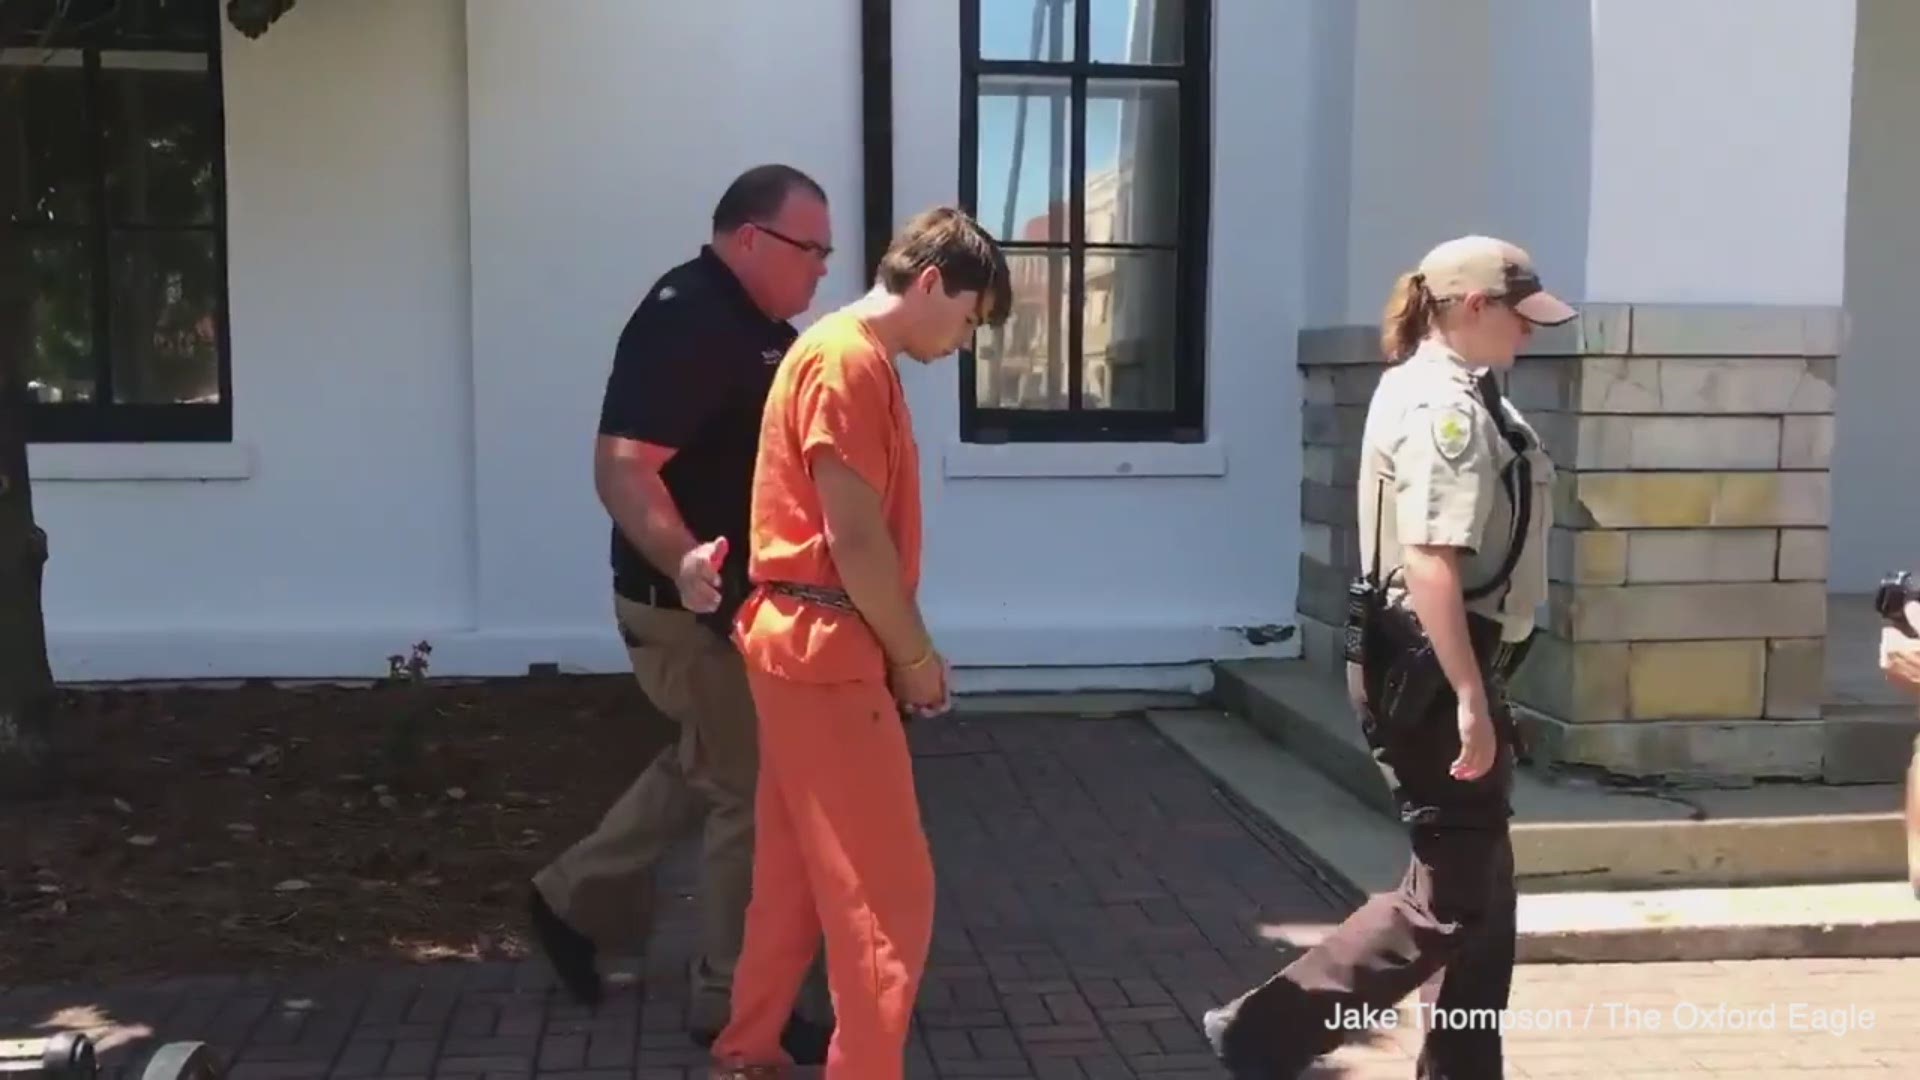 Brandon Theesfeld, of Fort Worth, is seen leaving the Lafayette County Courthouse after his first court appearance in connection to the death of 21-year-old Alexandria "Ally" Kostial.